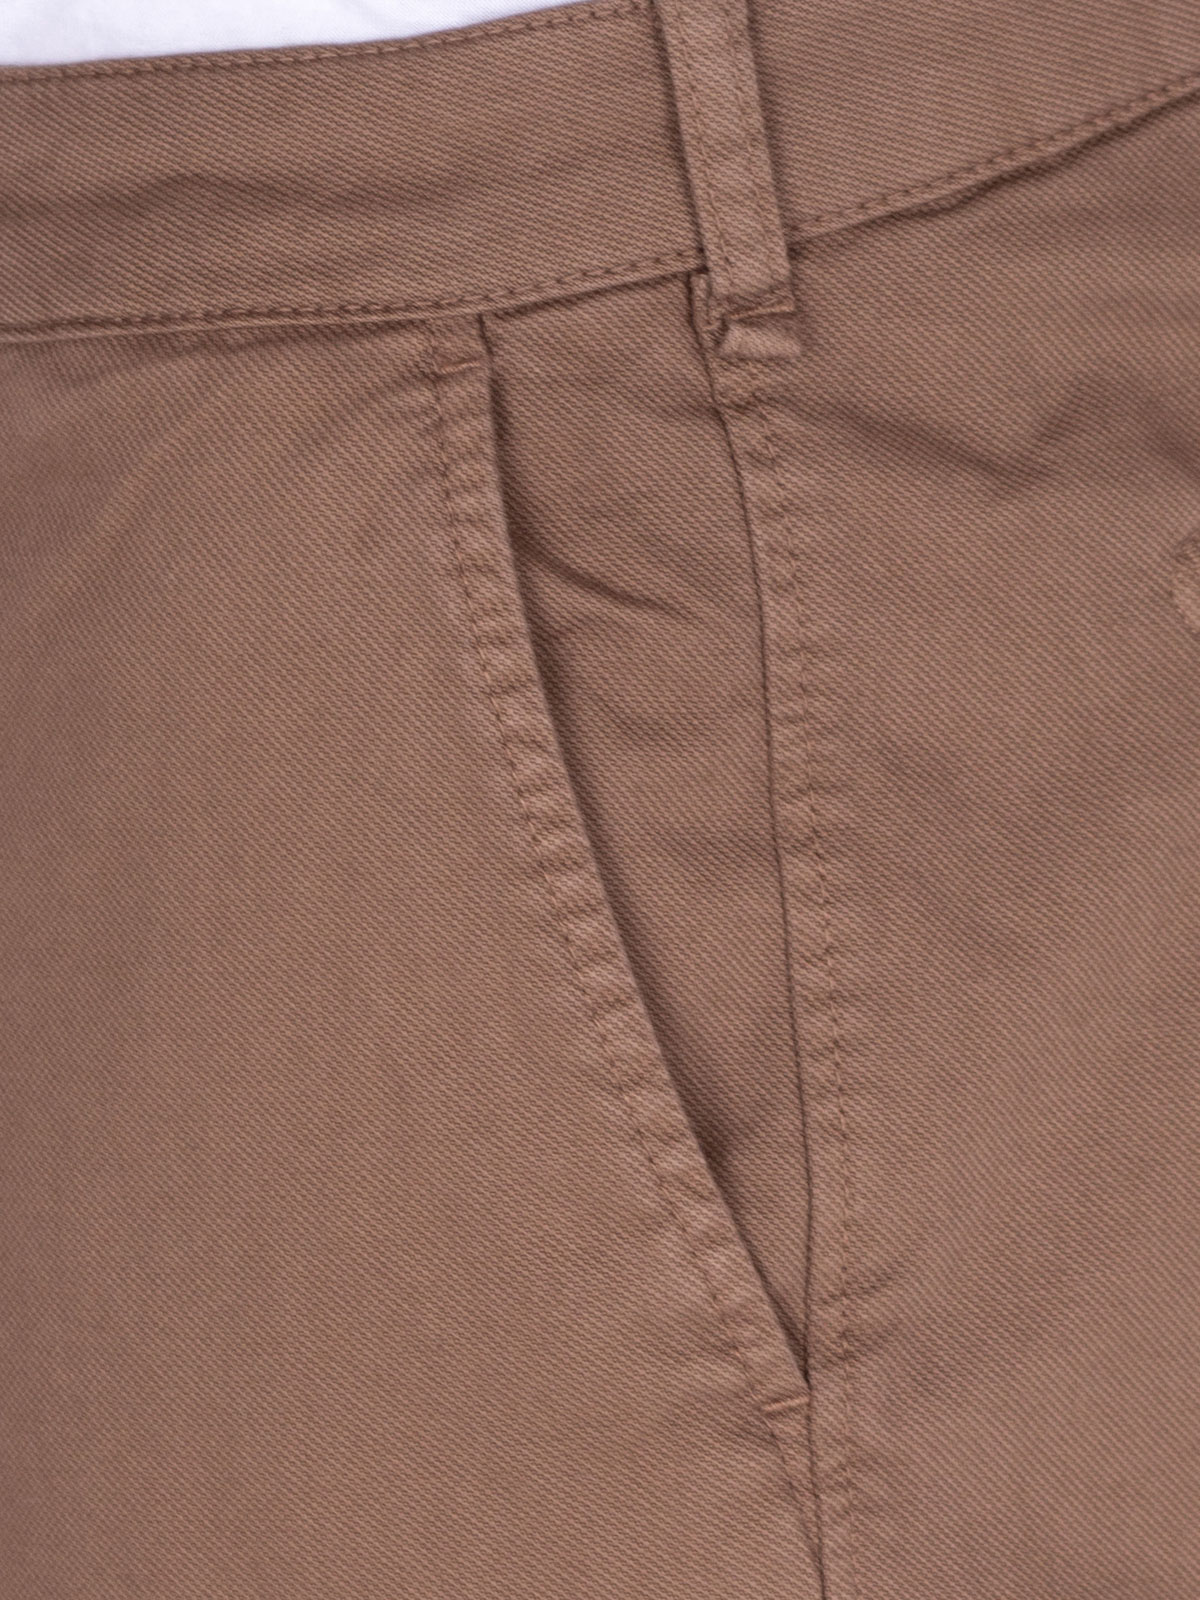 Fitted trousers in camel color - 60279 € 49.49 img2